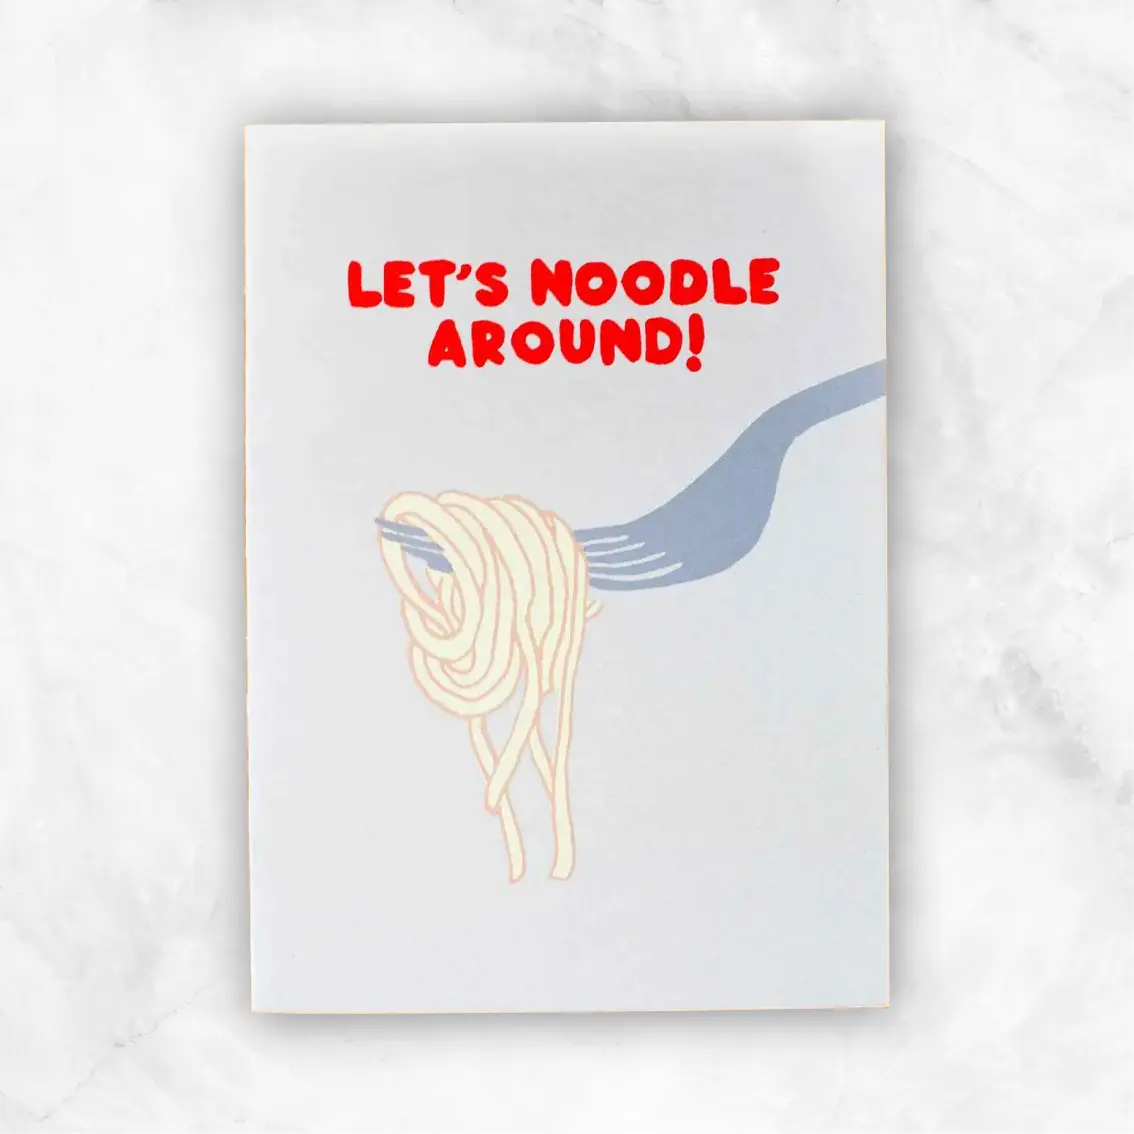 LET'S NOODLE AROUND